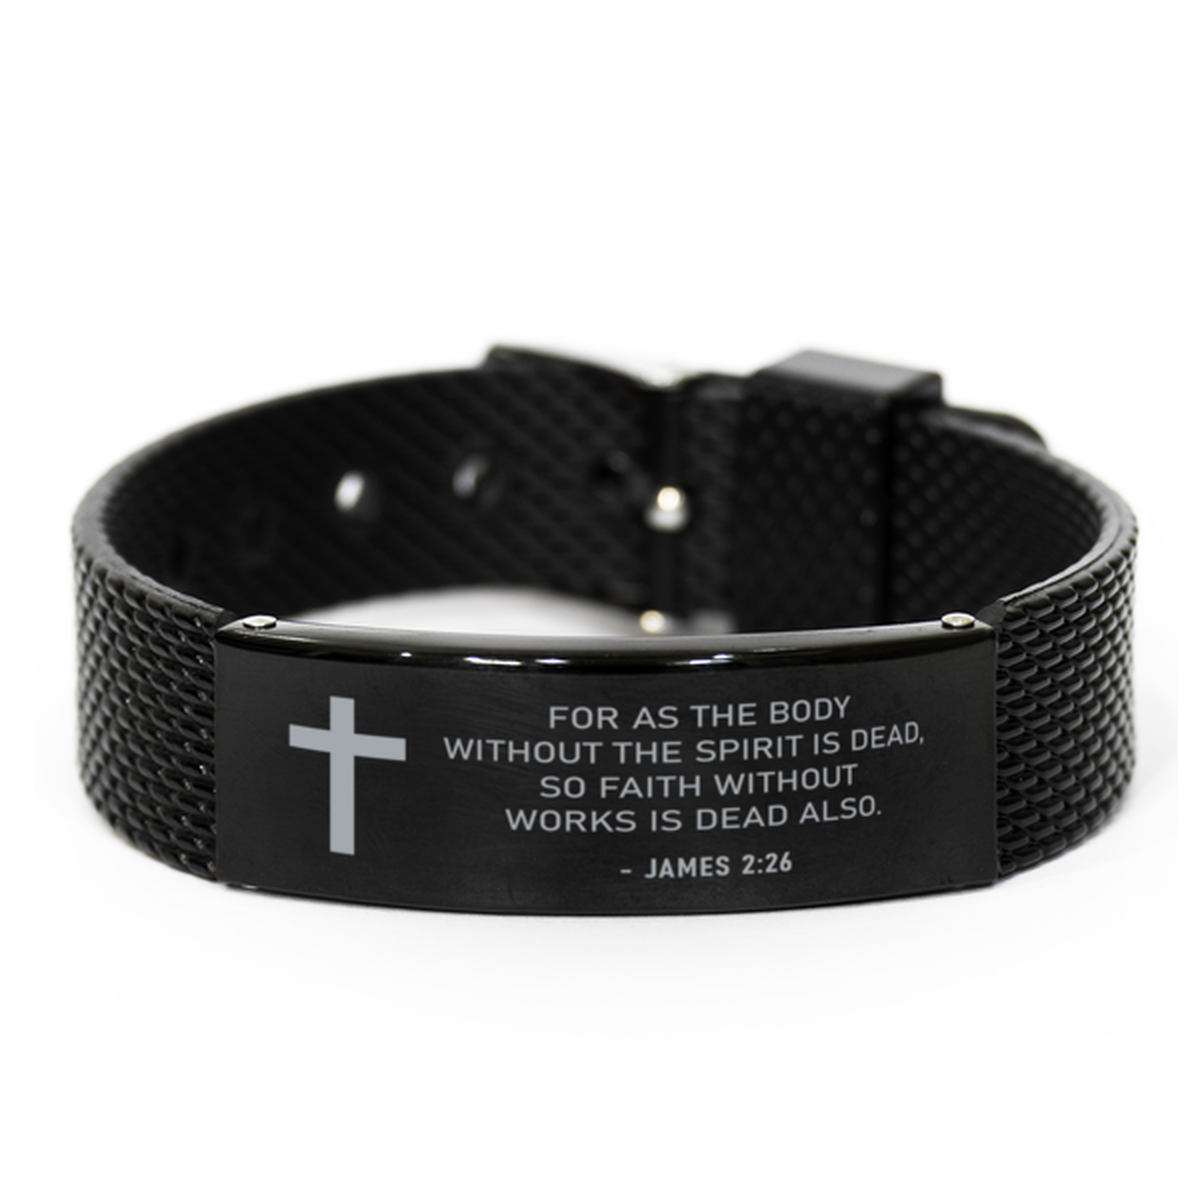 Christian Black Bracelet,, James 2:26 For As The Body Without The Spirit Is Dead, So, Motivational Bible Verse Gifts For Men Women